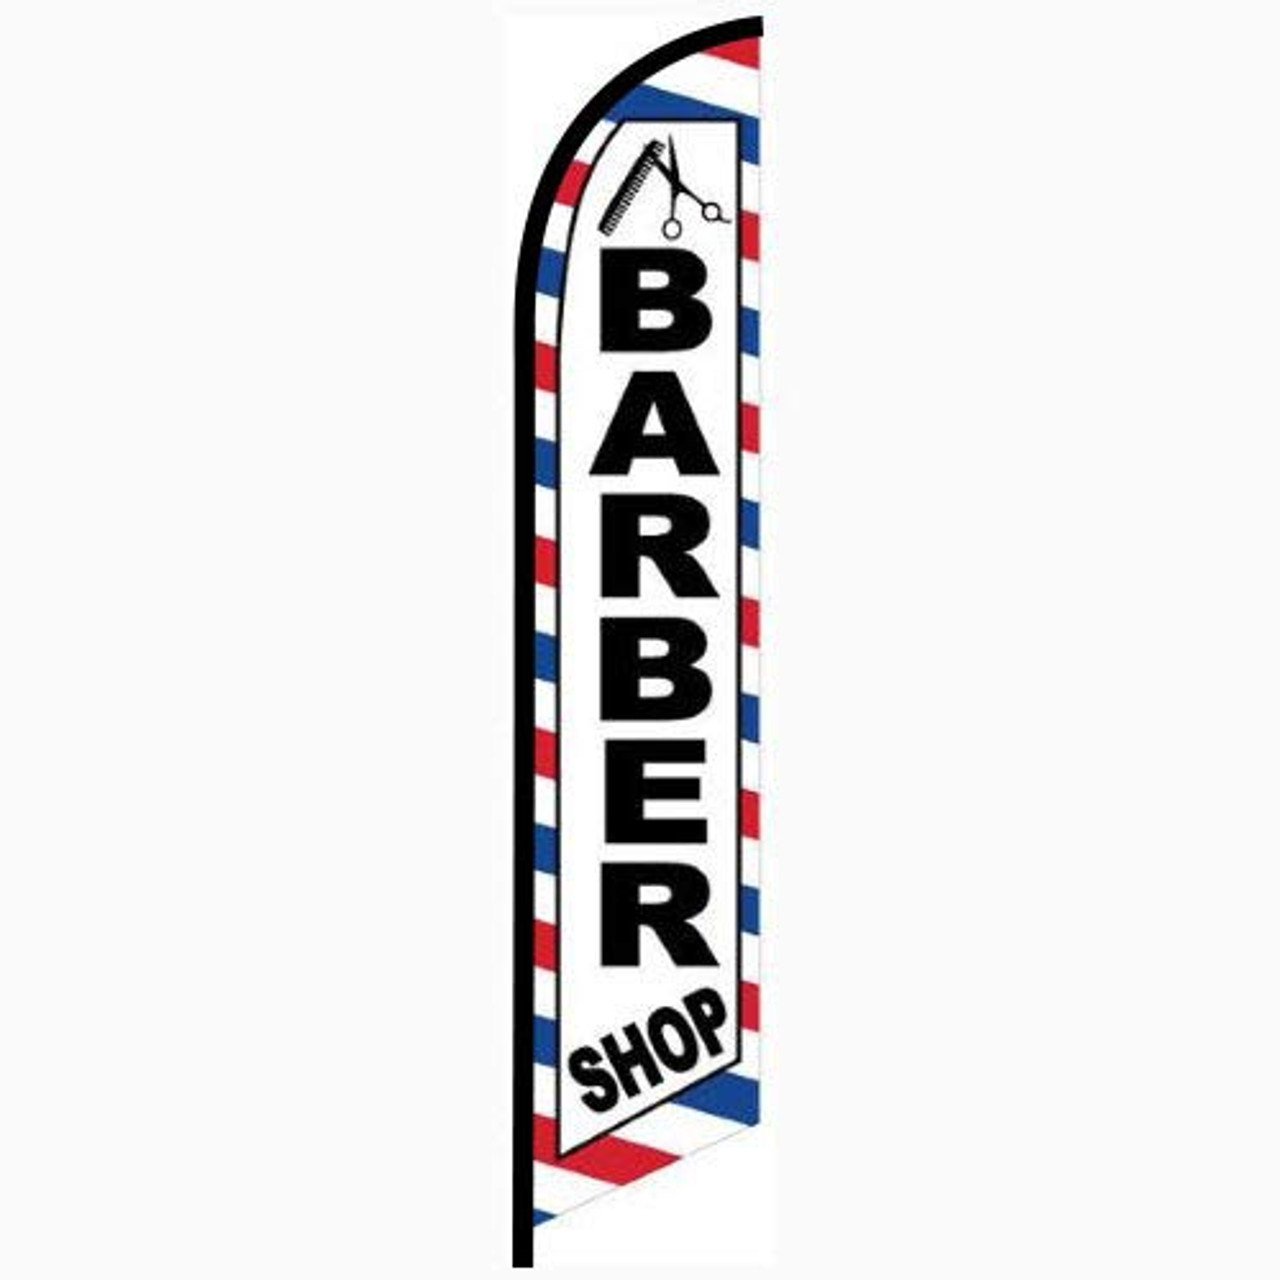 BARBER SHOP red/wh/bl1 15' Swooper #1 Feather Flag Banner KIT 